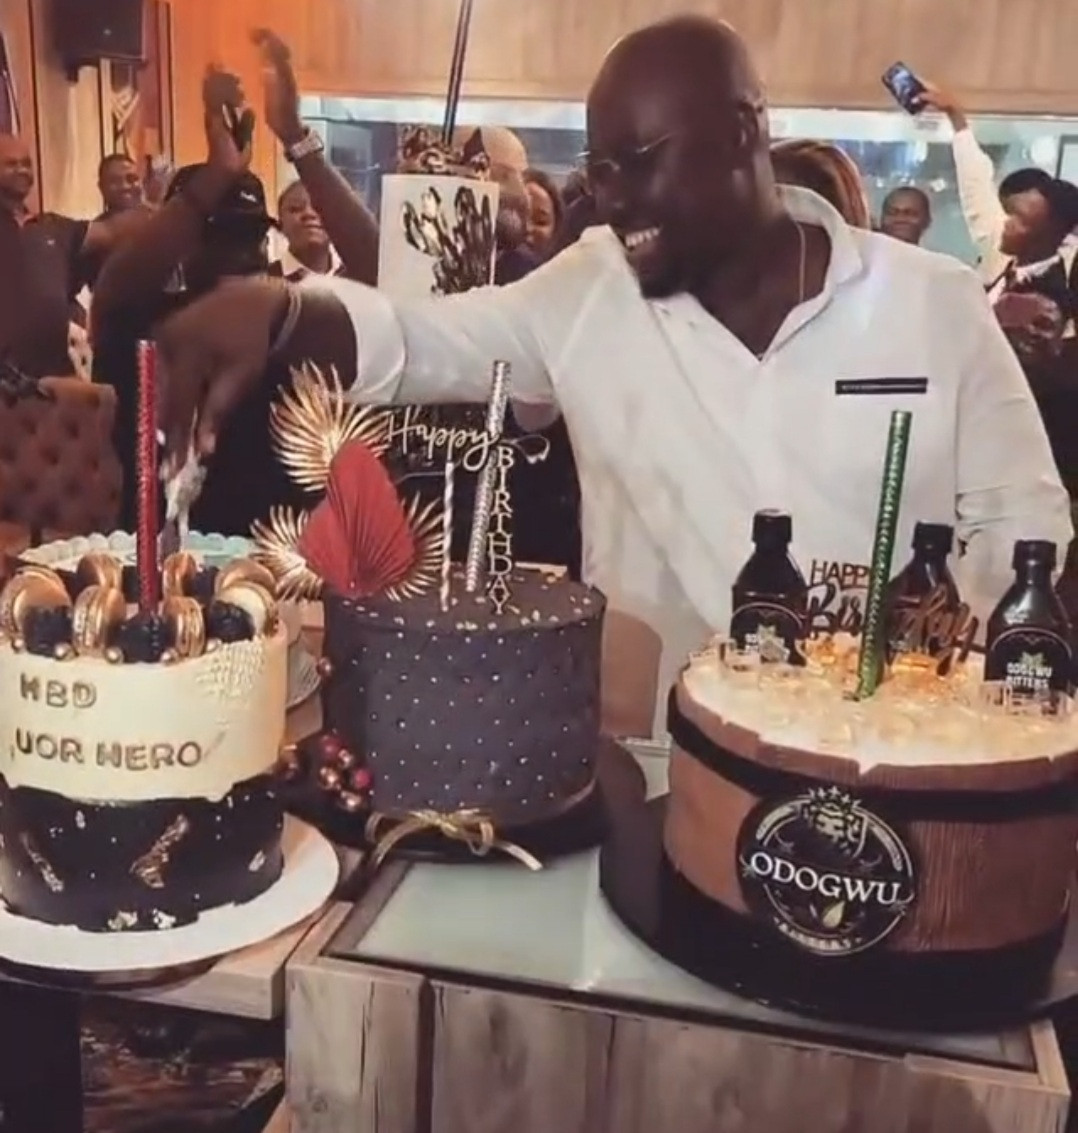 Obi Cubana cuts over 14 cakes at his birthday party (video)